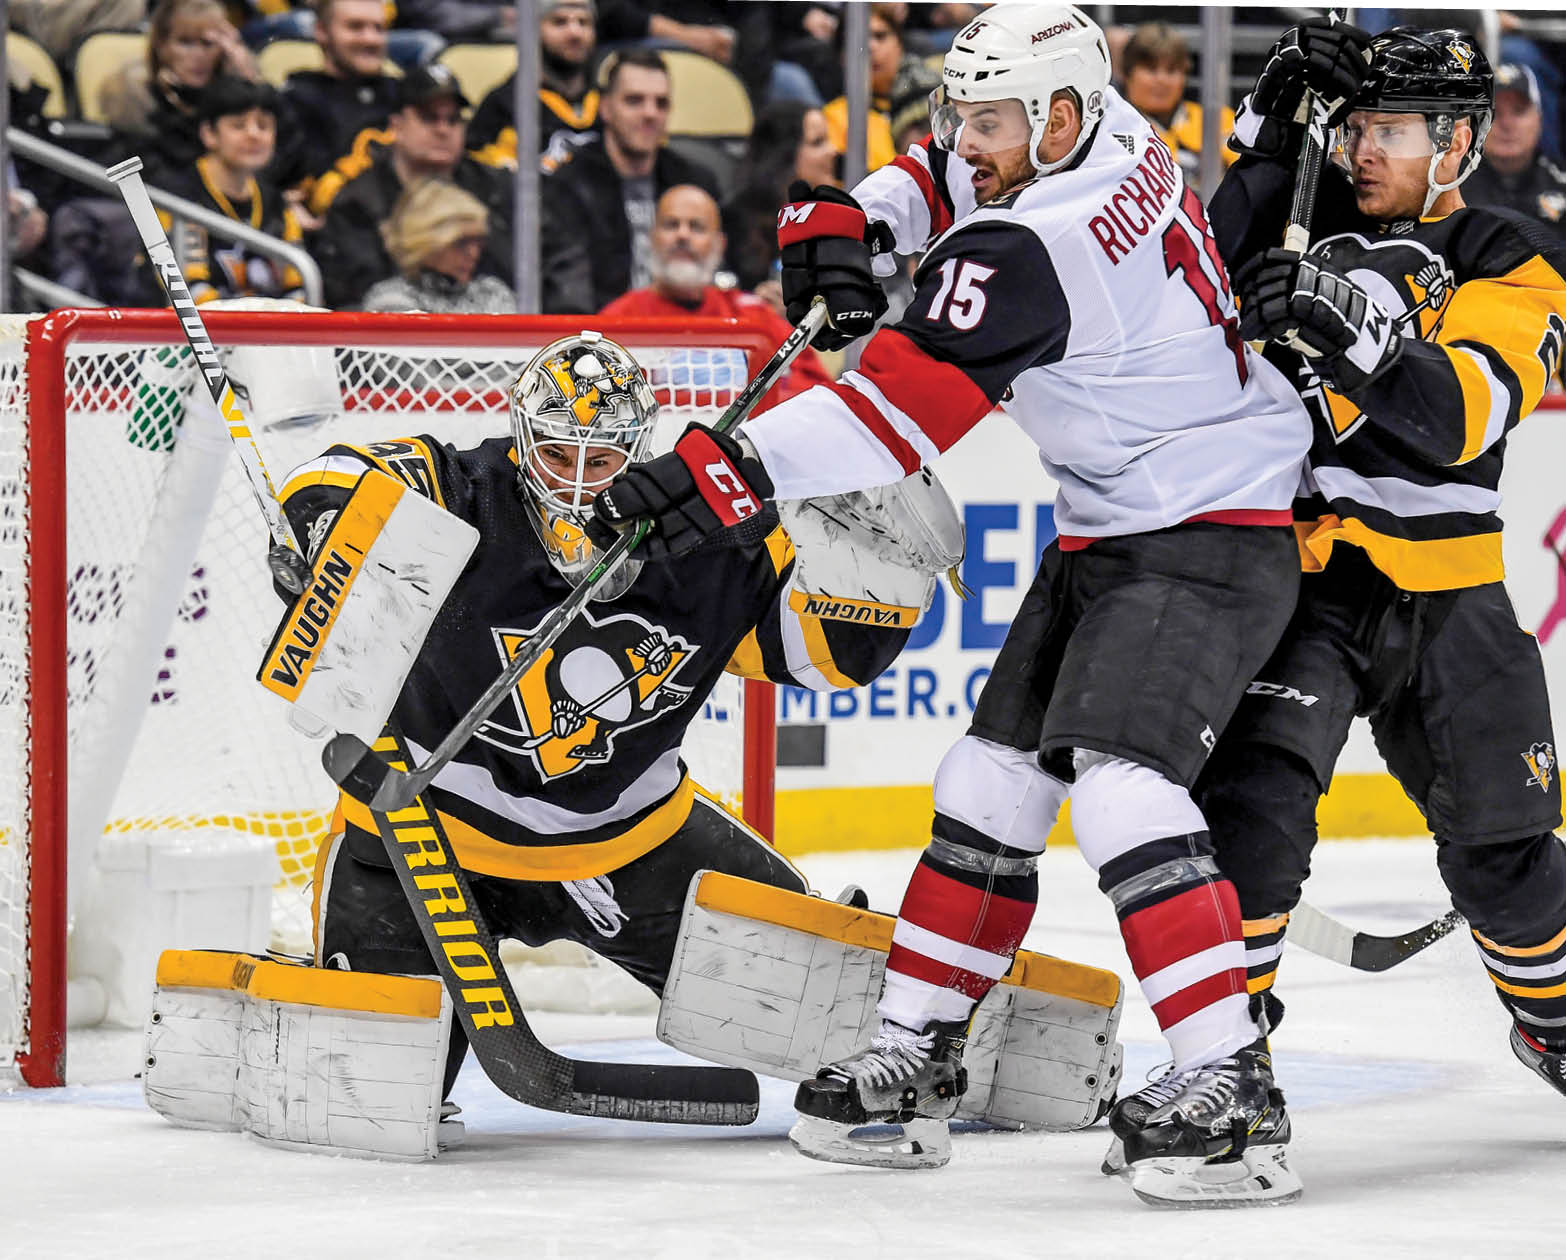 PITTSBURGH, PA - DECEMBER 06: Pittsburgh Penguins Goalie Tristan Jarry (35) makes a save on Arizona Coyotes Center Brad Richardson (15) in front wheel Pittsburgh Penguins Defenseman Chad Ruhwedel (2) defends during the first period in the NHL game between the Pittsburgh Penguins and the Arizona Coyotes on December 6, 2019, at PPG Paints Arena in Pittsburgh, PA  (Photo by Jeanine Leech Icon Sportswire via Getty Images)